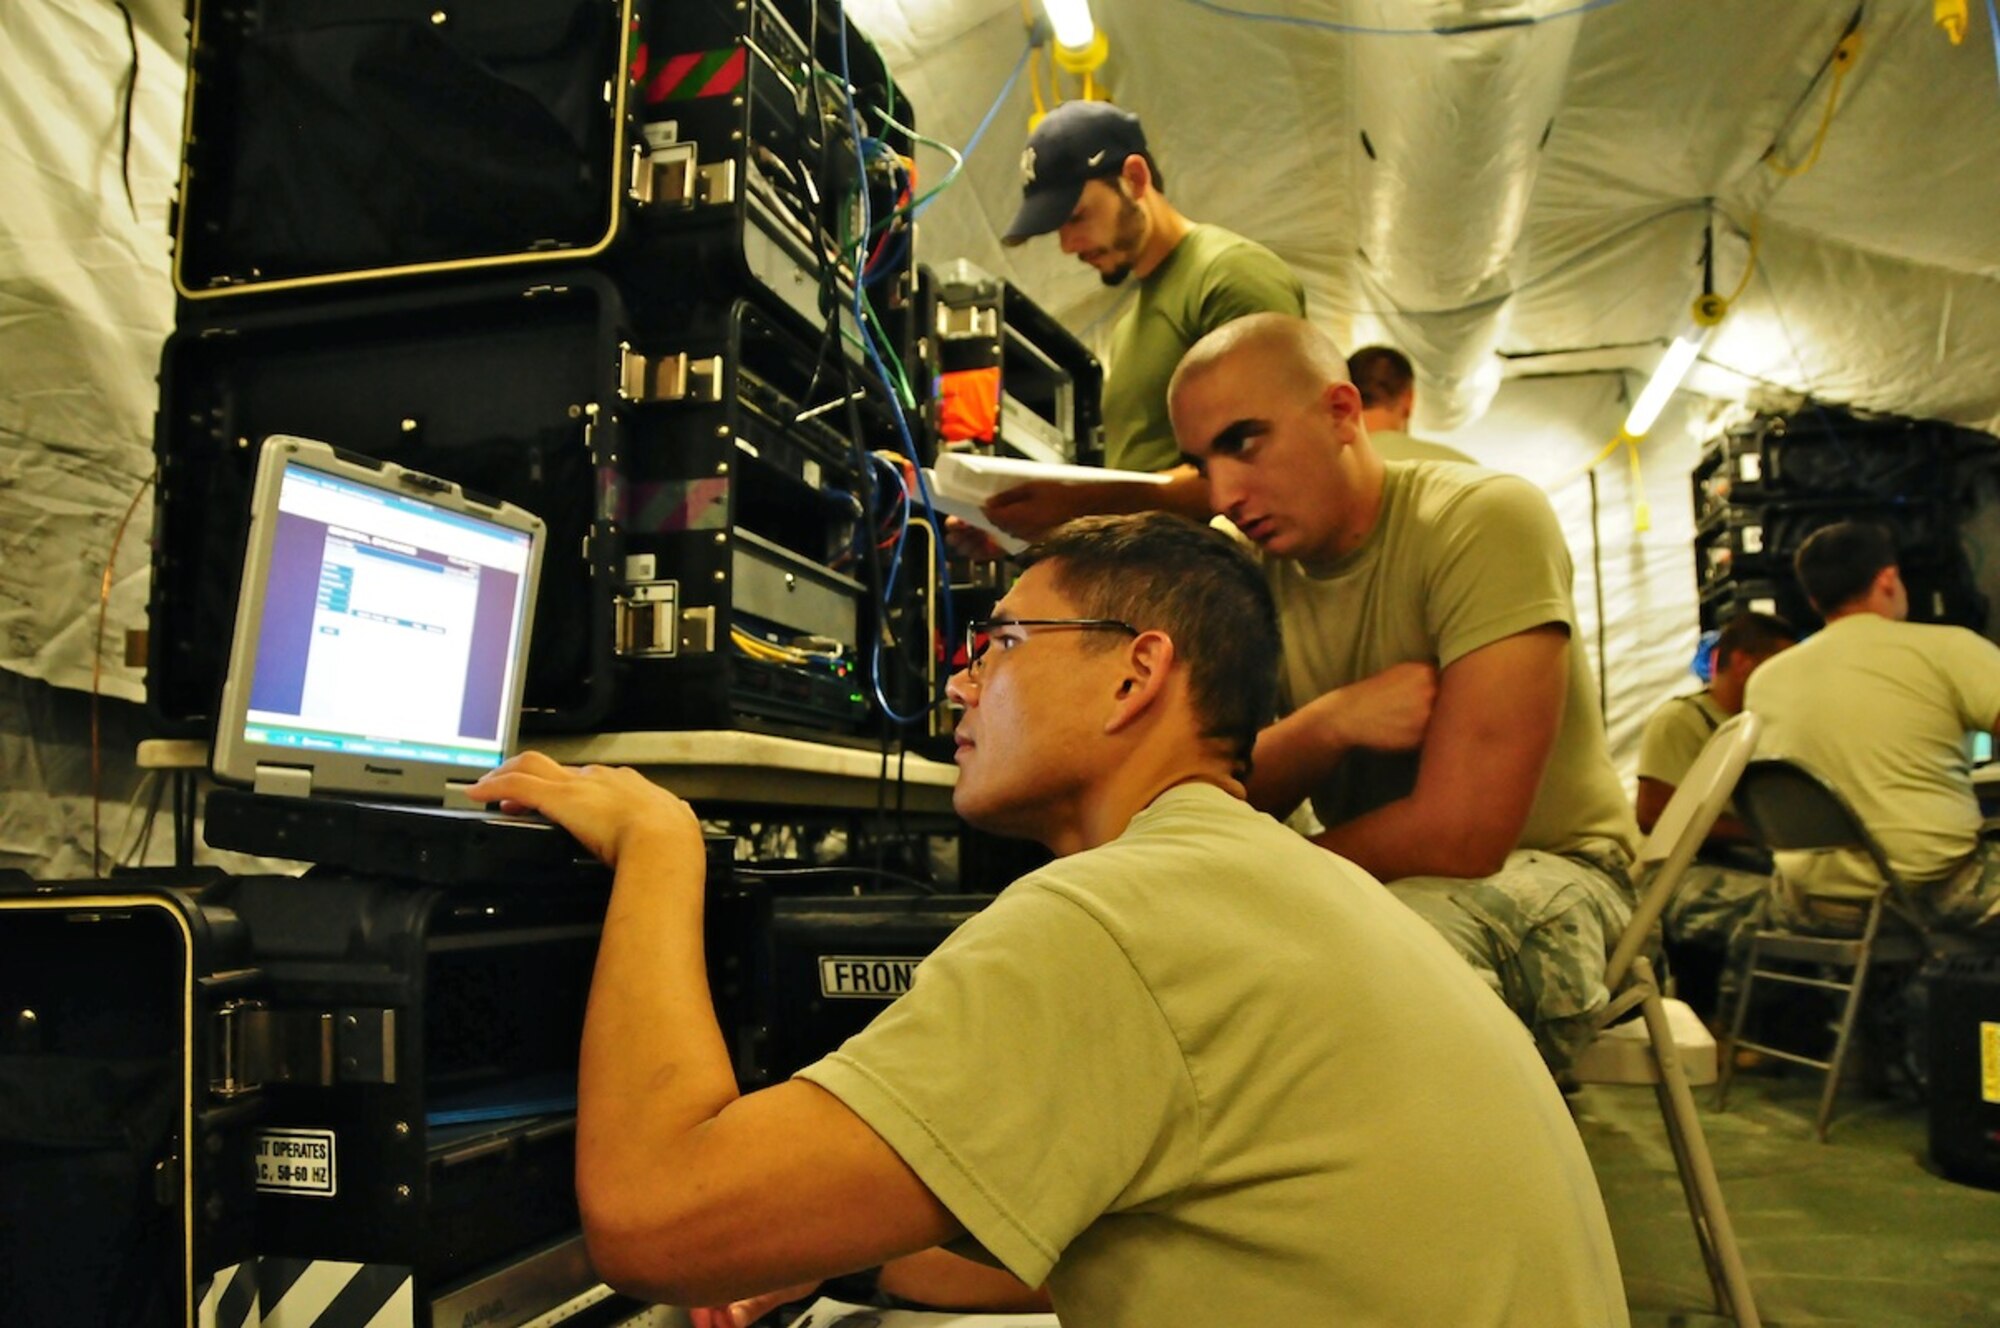 Senior Airman Brandon Hudson, 644th Combat Communications Squadron cyber transport technician, watches as Staff Sgt. David Popovich, 644 CBCS cyber transport technician, works on setting up the network for the simulated Forward Operating Base Dragon Hill April 19. The 644 CBCS is conducting a deployment exercise from April 16 to 27 in order to test their capabilities in the field and improve their war-fighting capabilities.  (U.S. Air Force photo by Airman 1st Class Marianique Santos)  